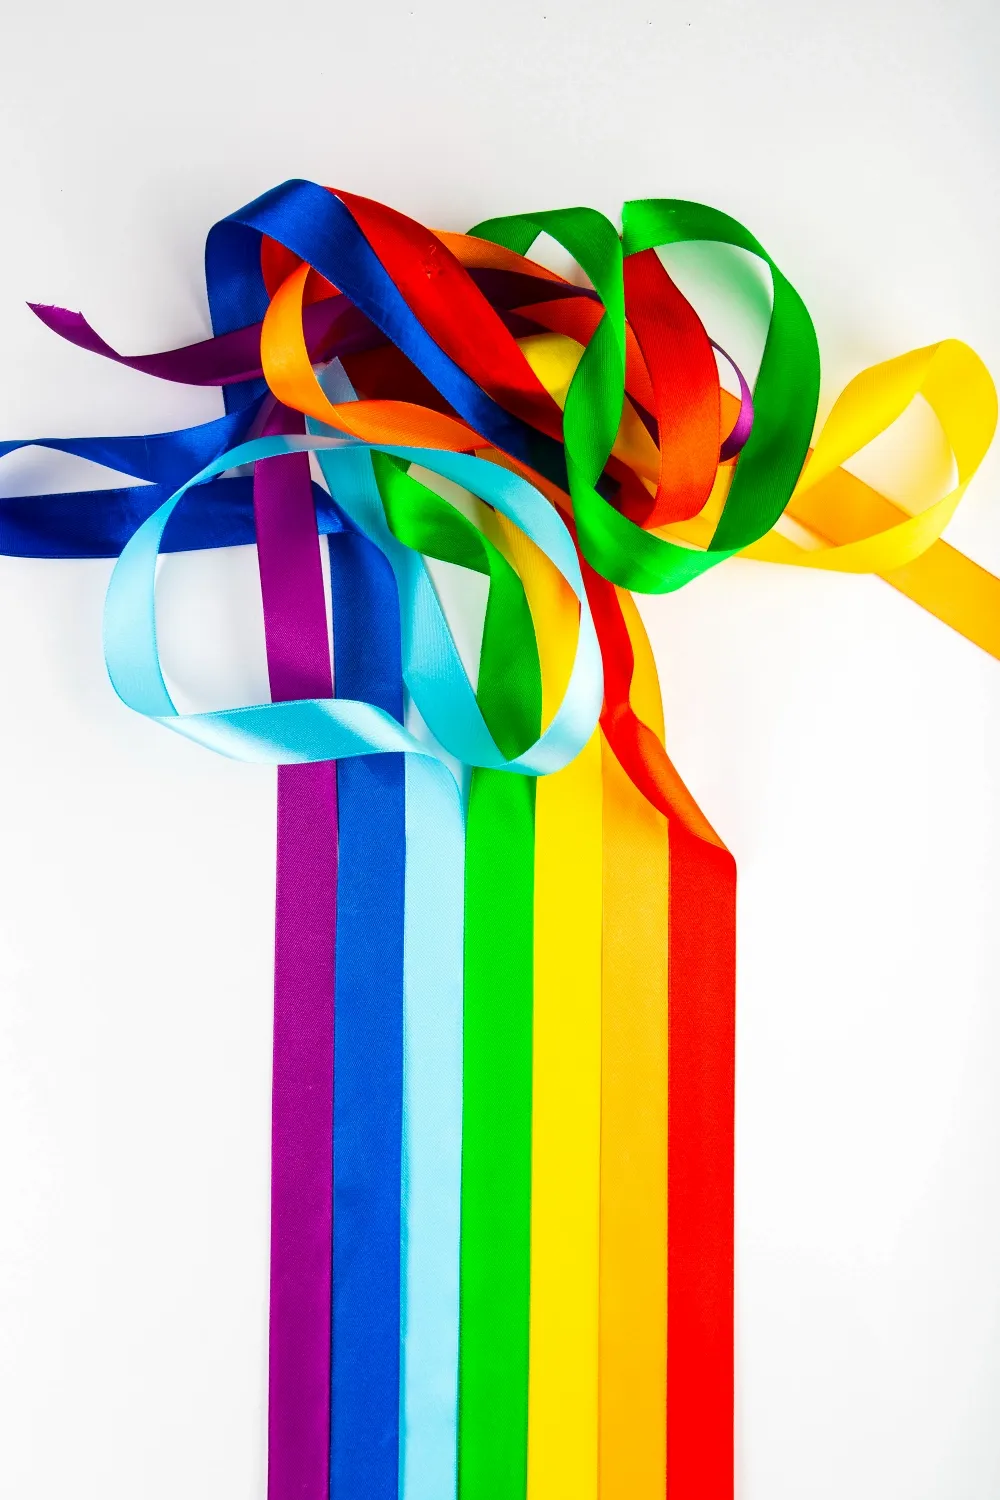 Lgbt flag symbol made of satin ribbons on a white background